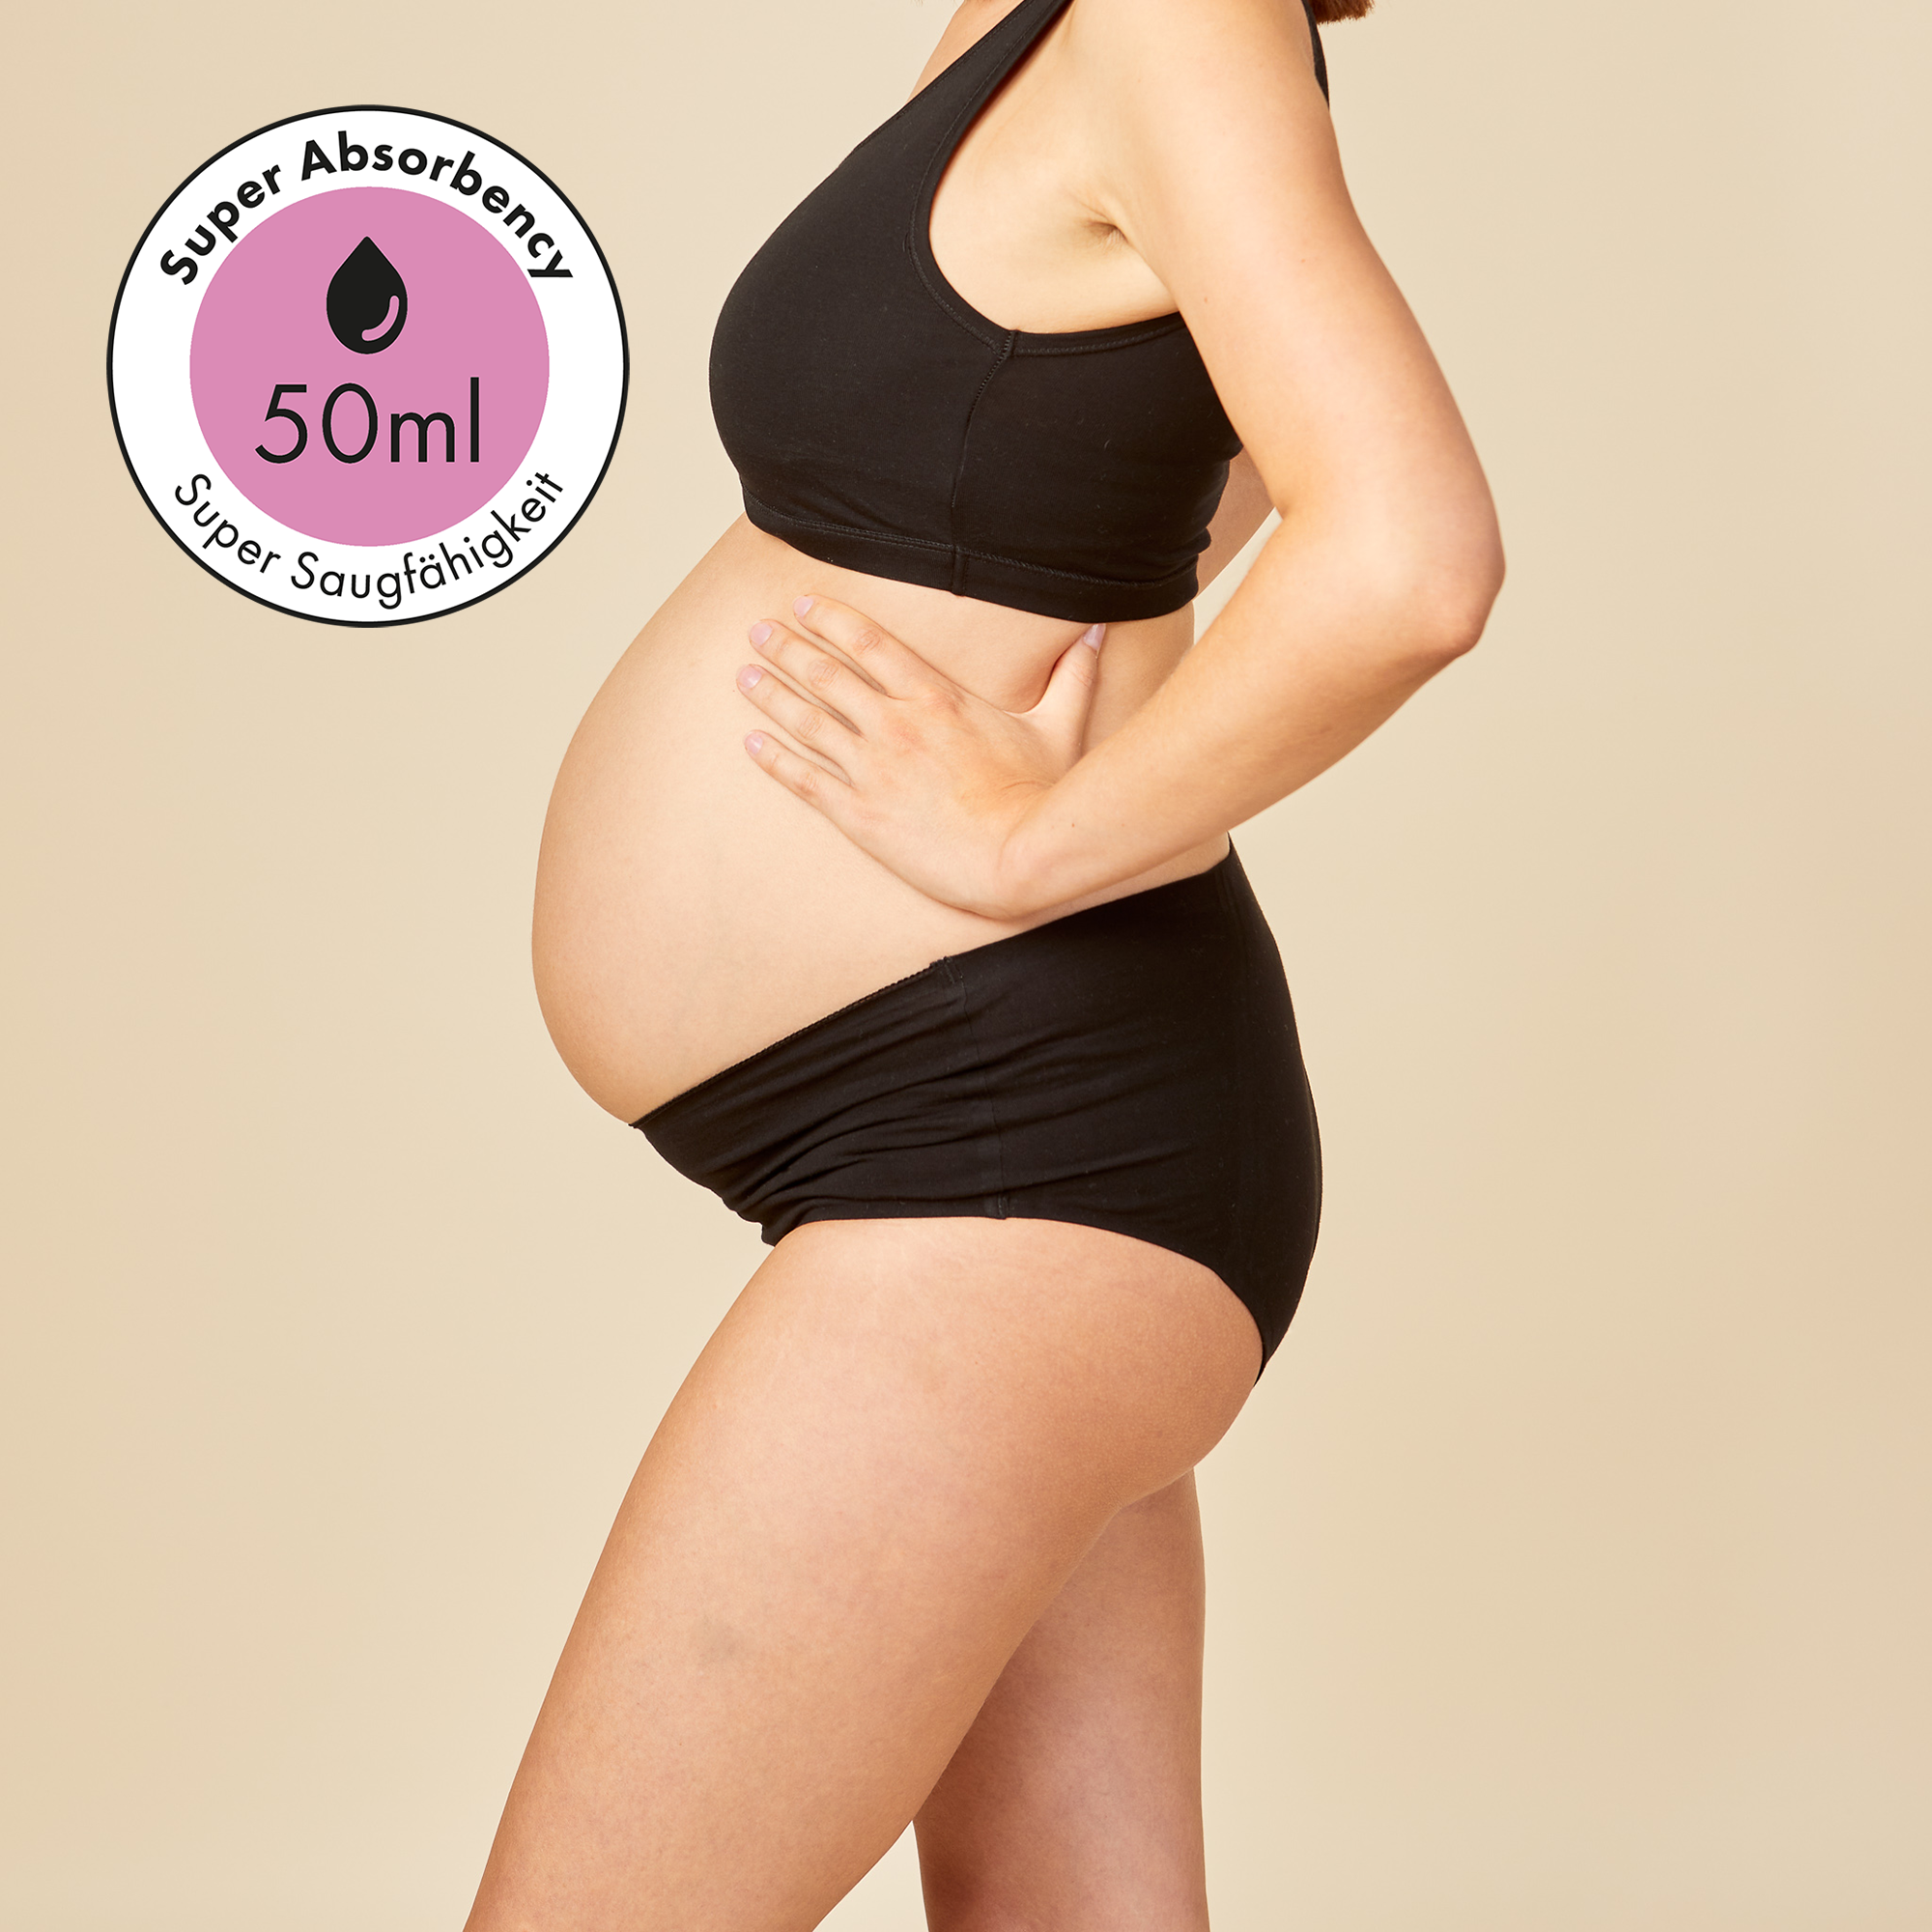 dais maternity absorbent underwear in high waist cut in black. Shown on pregnant model from the side with super absorbency of 50ml. 